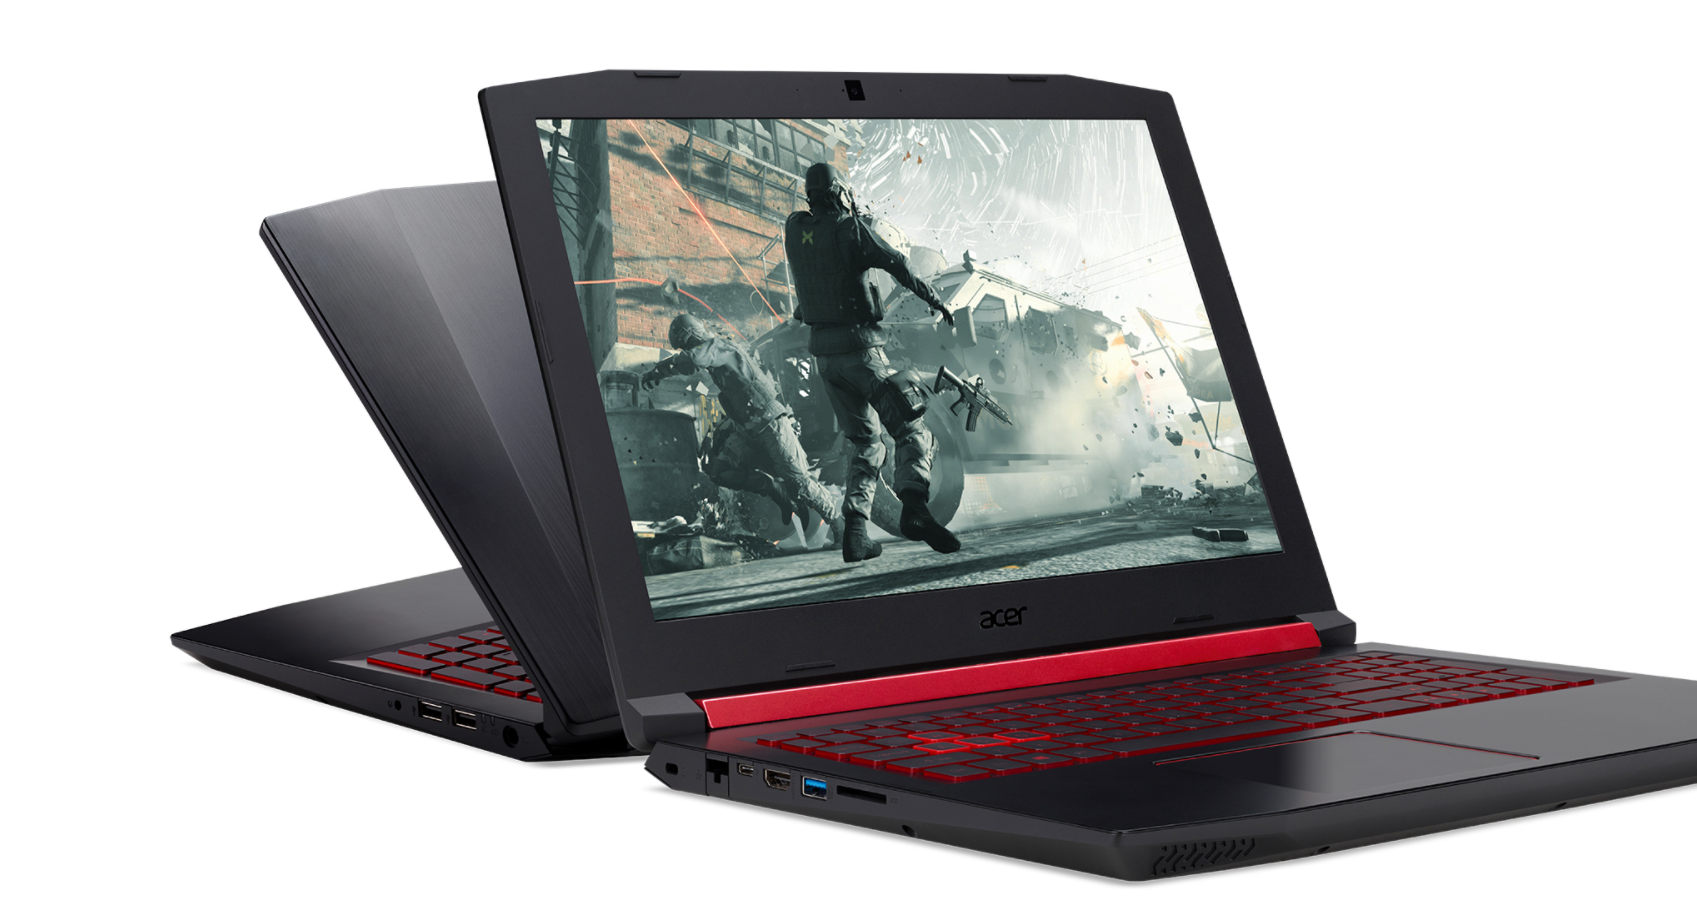 Acer Nitro 5 gaming laptop revealed with 8th Generation Intel Core i7 / i7+ processors, Dolby Atmos speakers and more